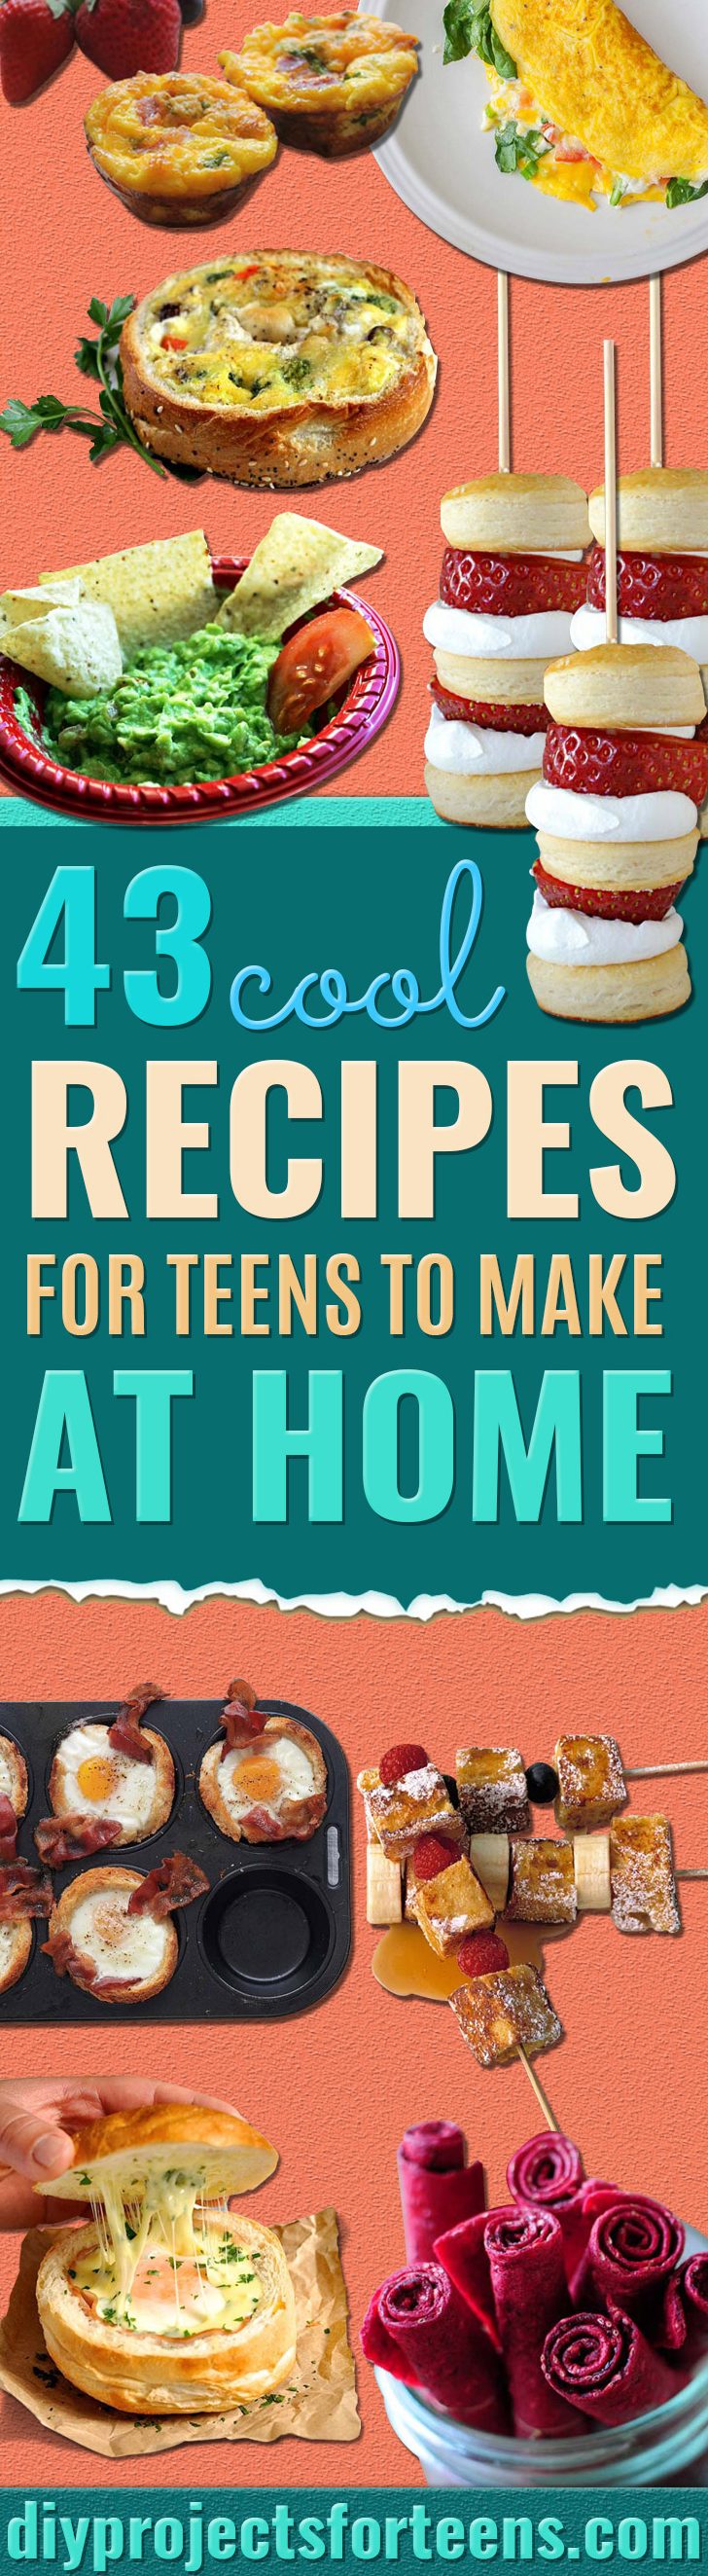 Cool and Easy Recipes For Teens to Make at Home - Fun Snacks, Simple Breakfasts, Lunch Ideas, Dinner and Dessert Recipe Tutorials - Teenagers Love These Fun Foods that Are Quick, Healthy and Delicious Ideas for Meals 